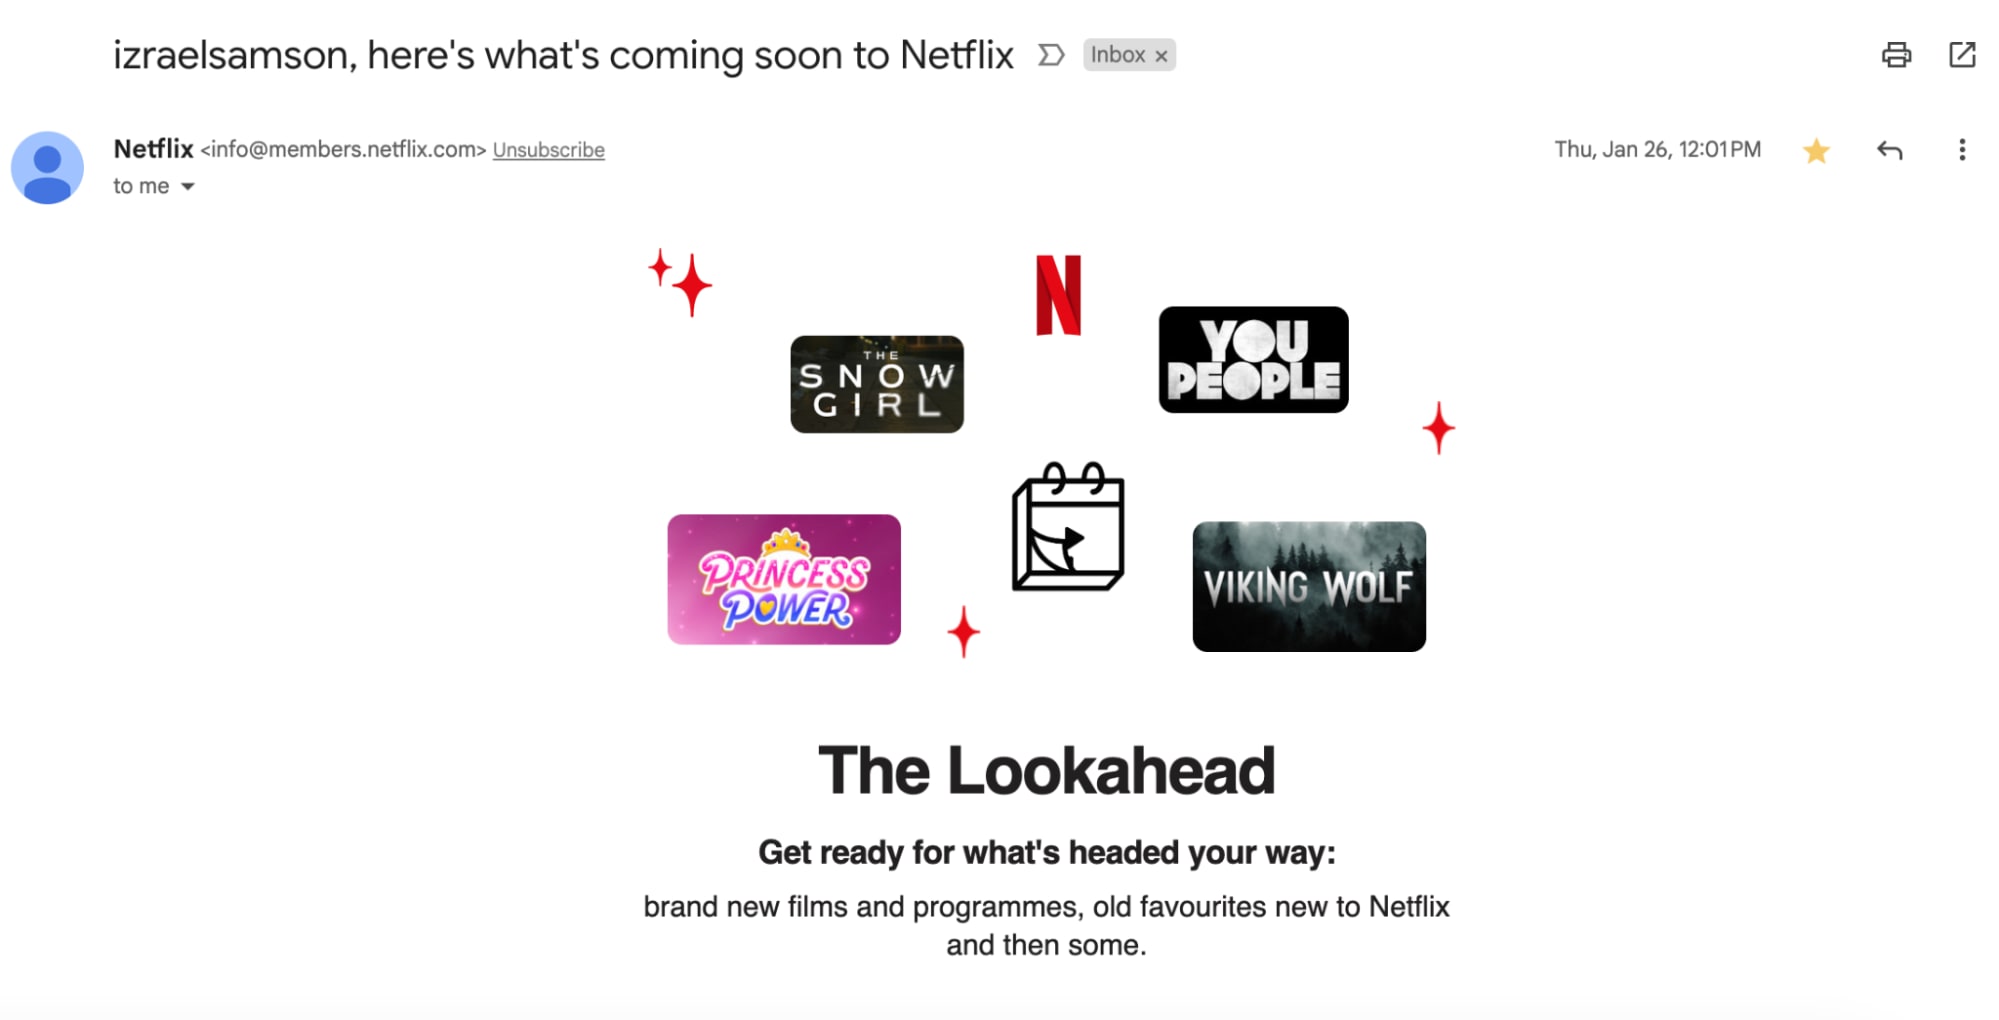 A personalized email from Netflix.